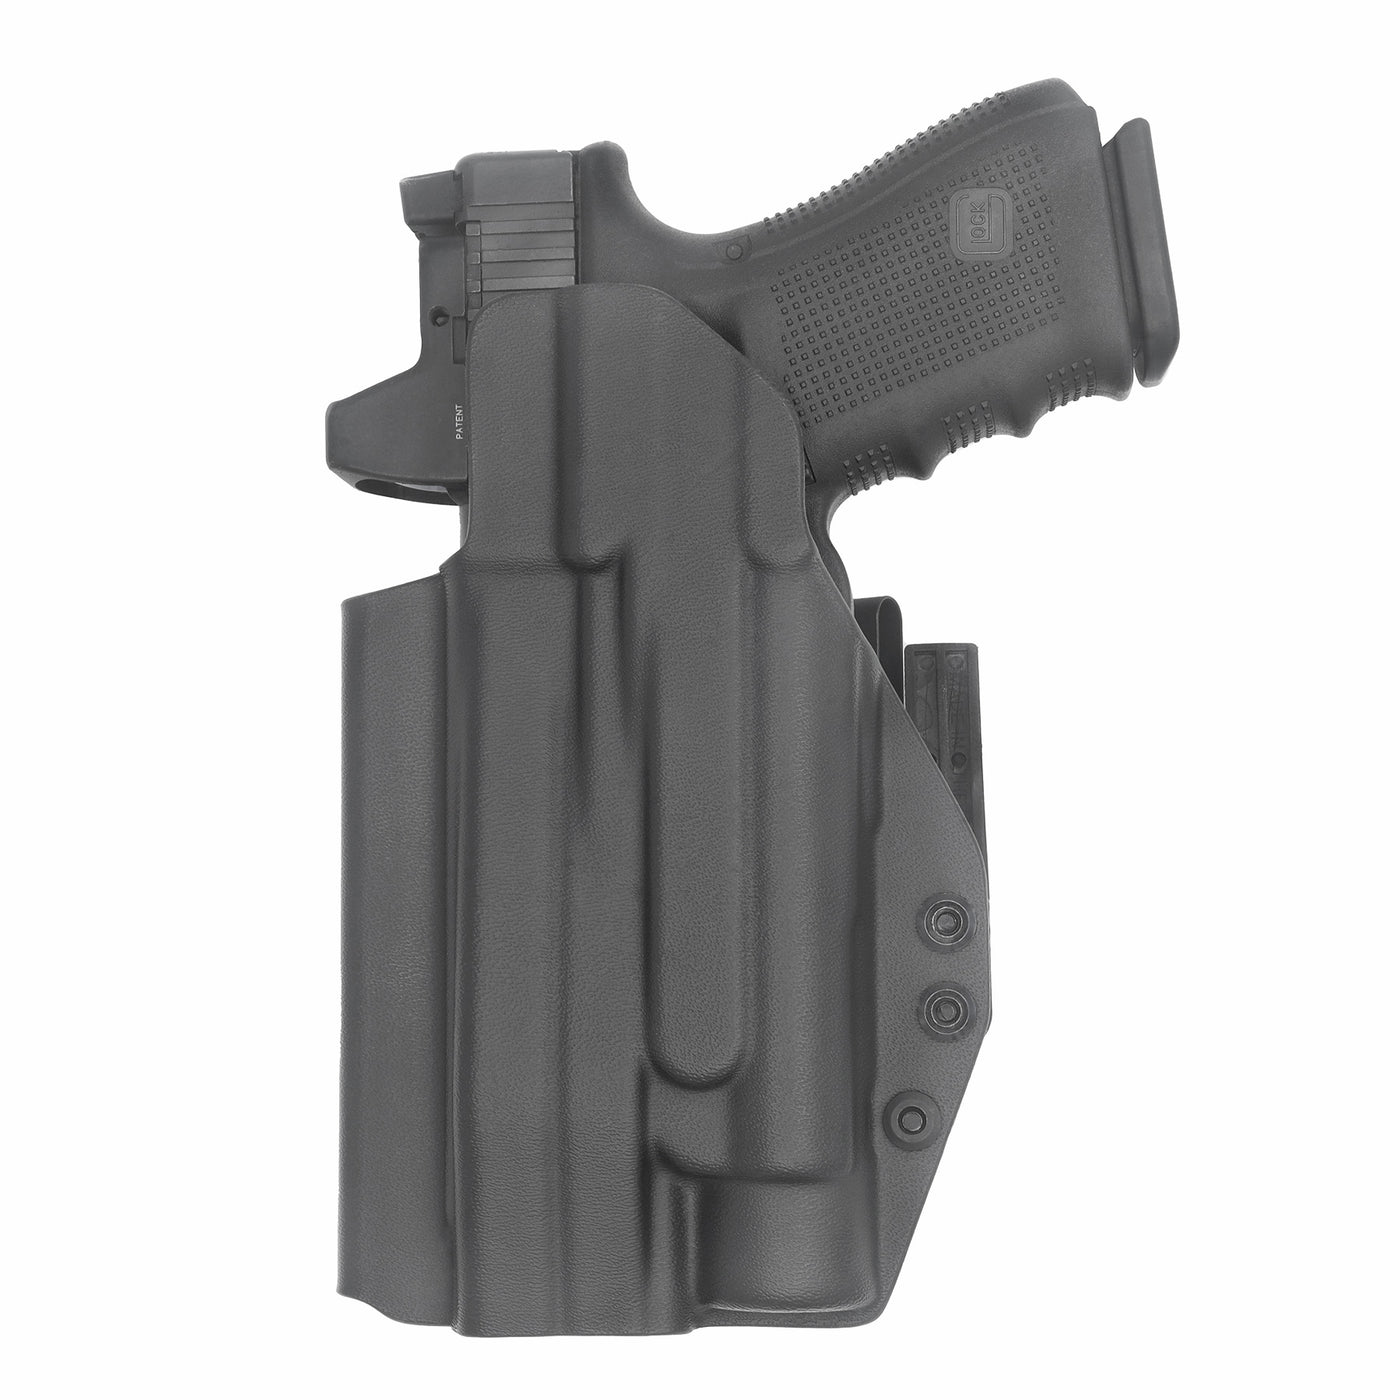 C&G Holsters Custom IWB Tactical ALPHA UPGRADE ZEV OZ9/c Streamlight TLR1 in holstered position back view